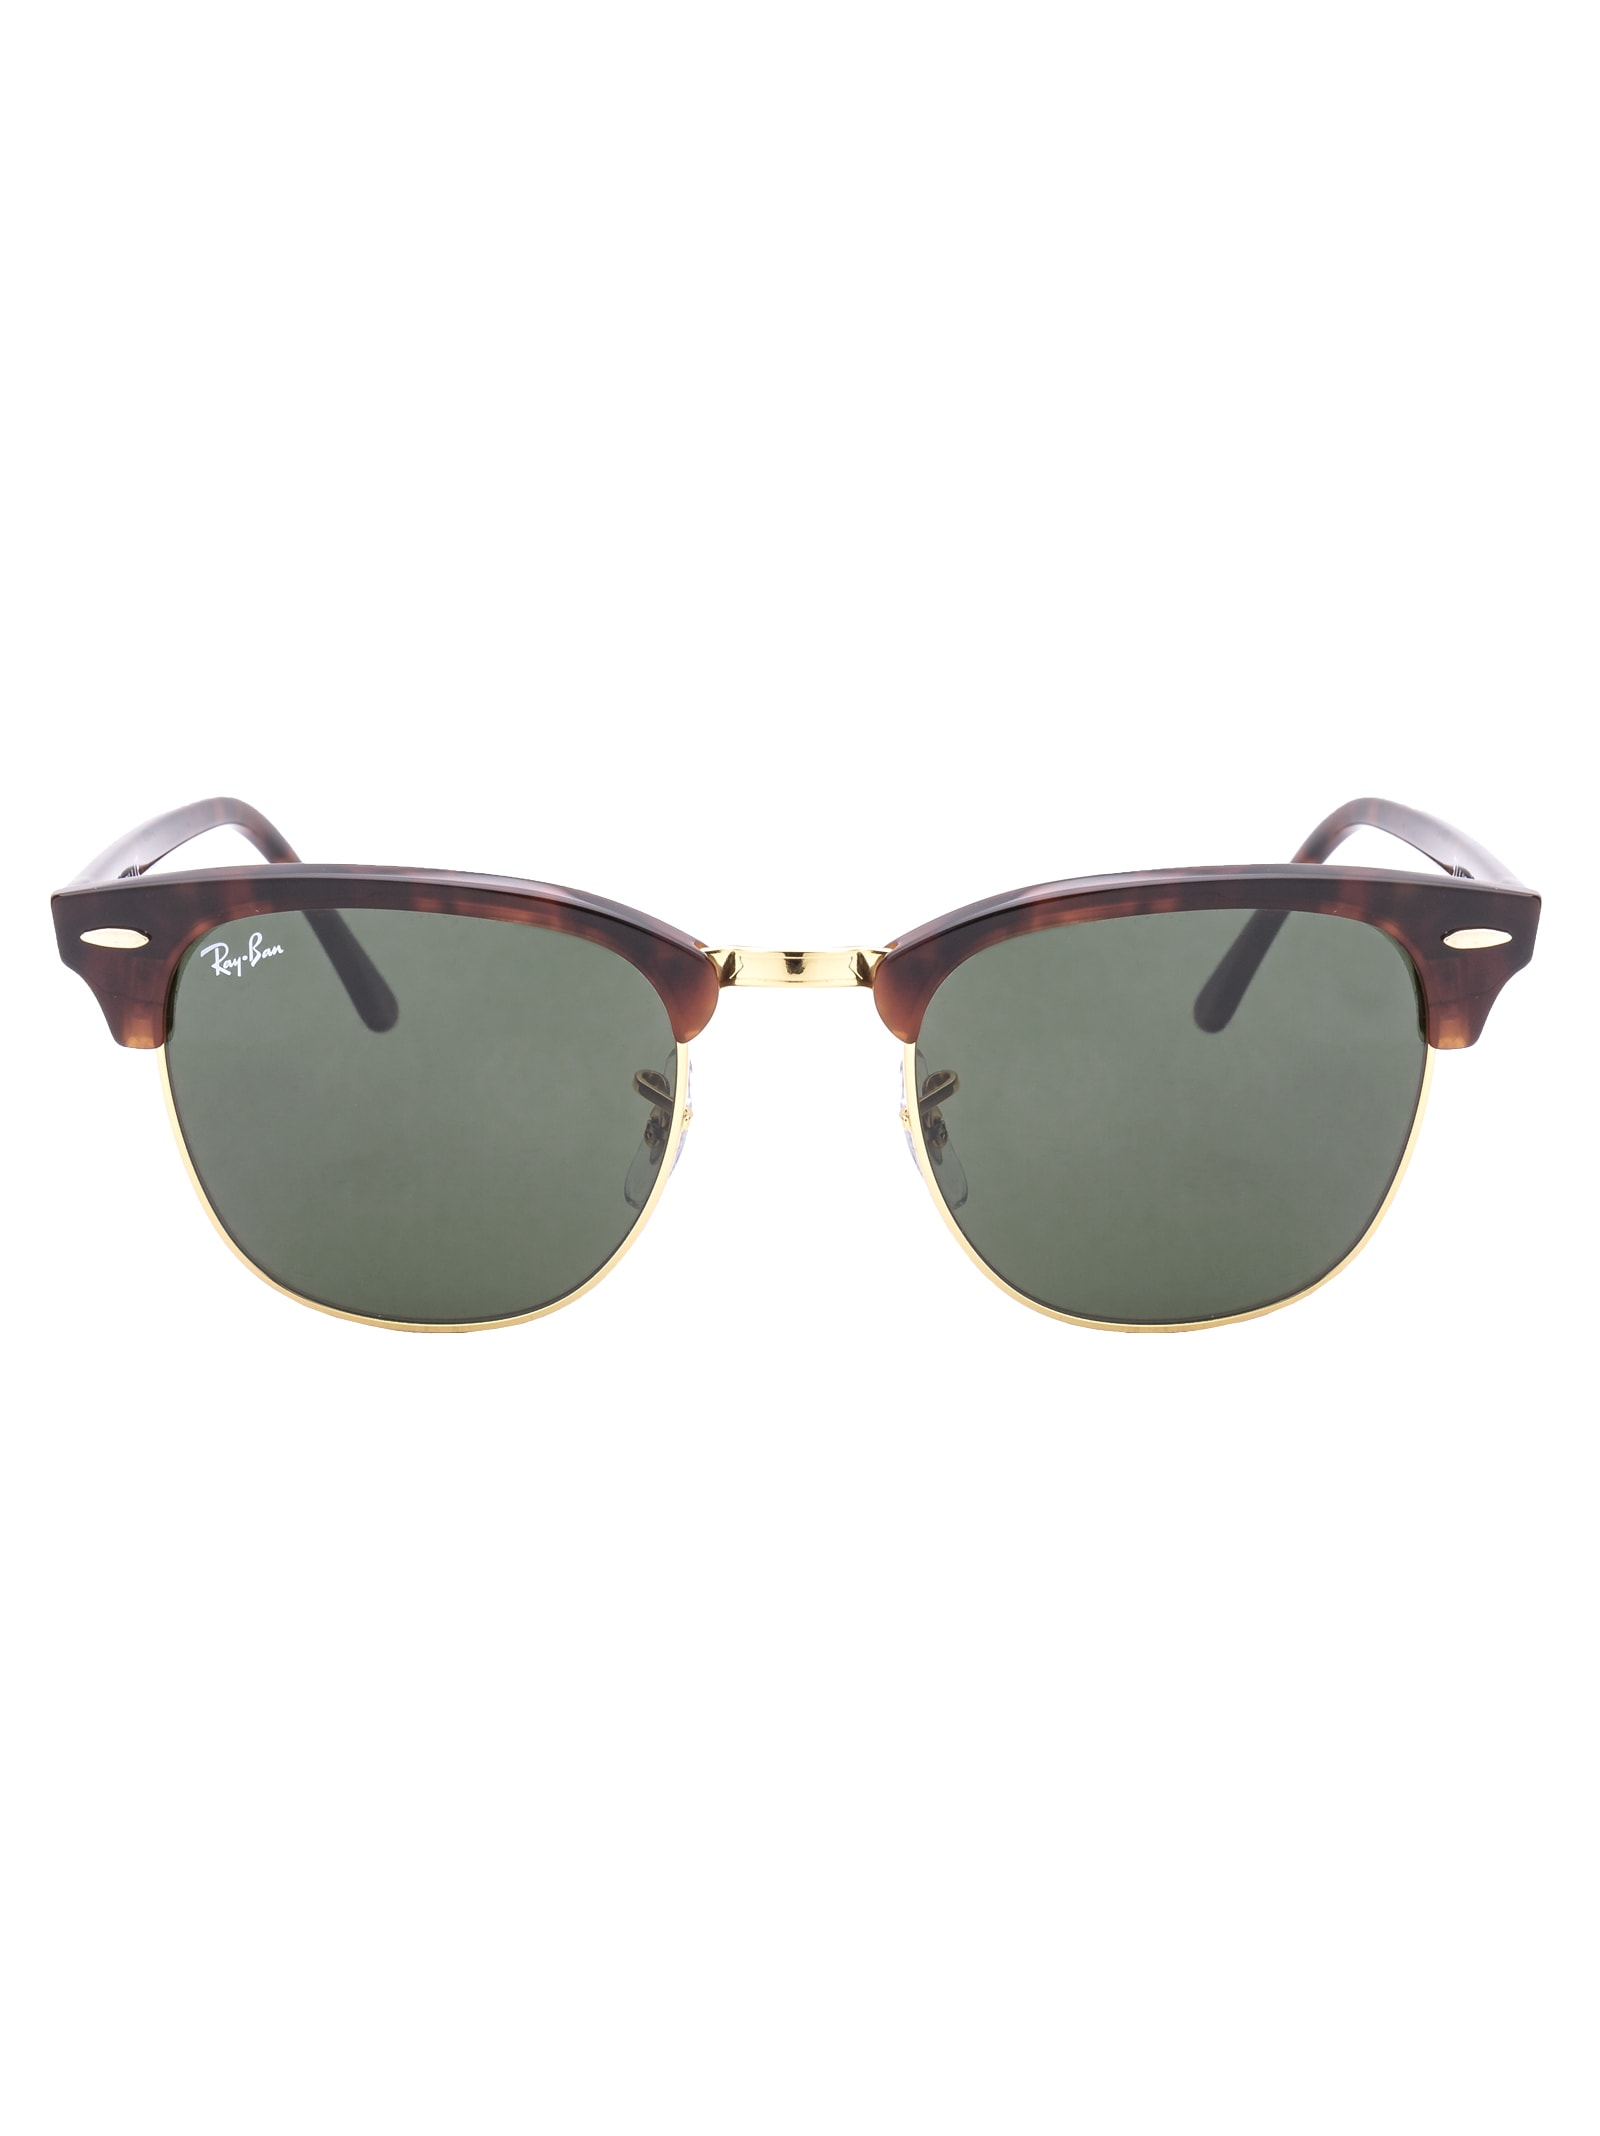 Ray Ban Clubmaster Sunglasses In W0366 Mock Tortoise On Arista